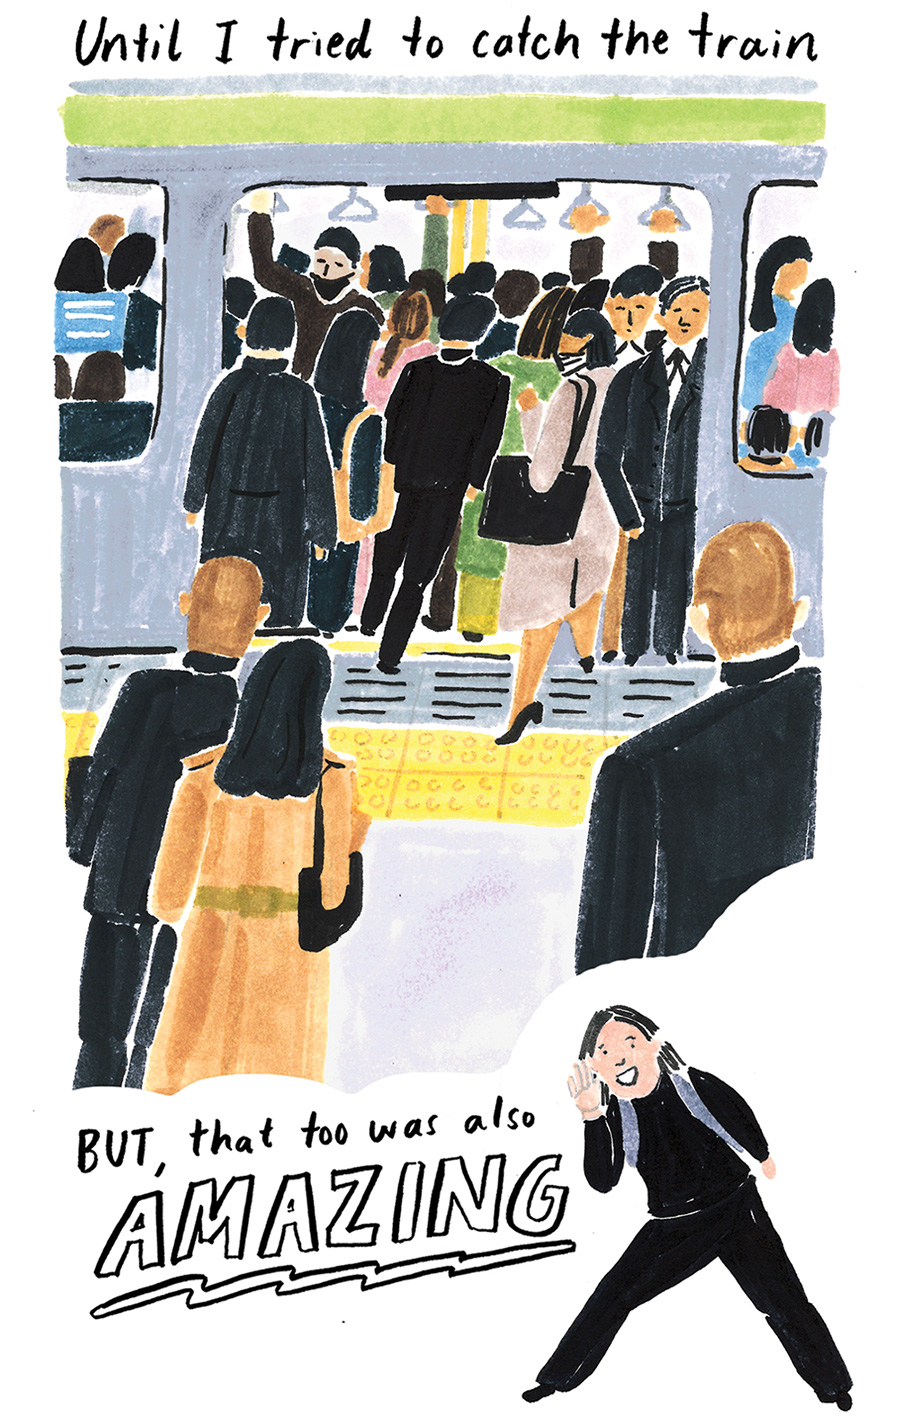 "Until I tried to catch the train [image of people crammed in a train] but that too was also AMAZING."